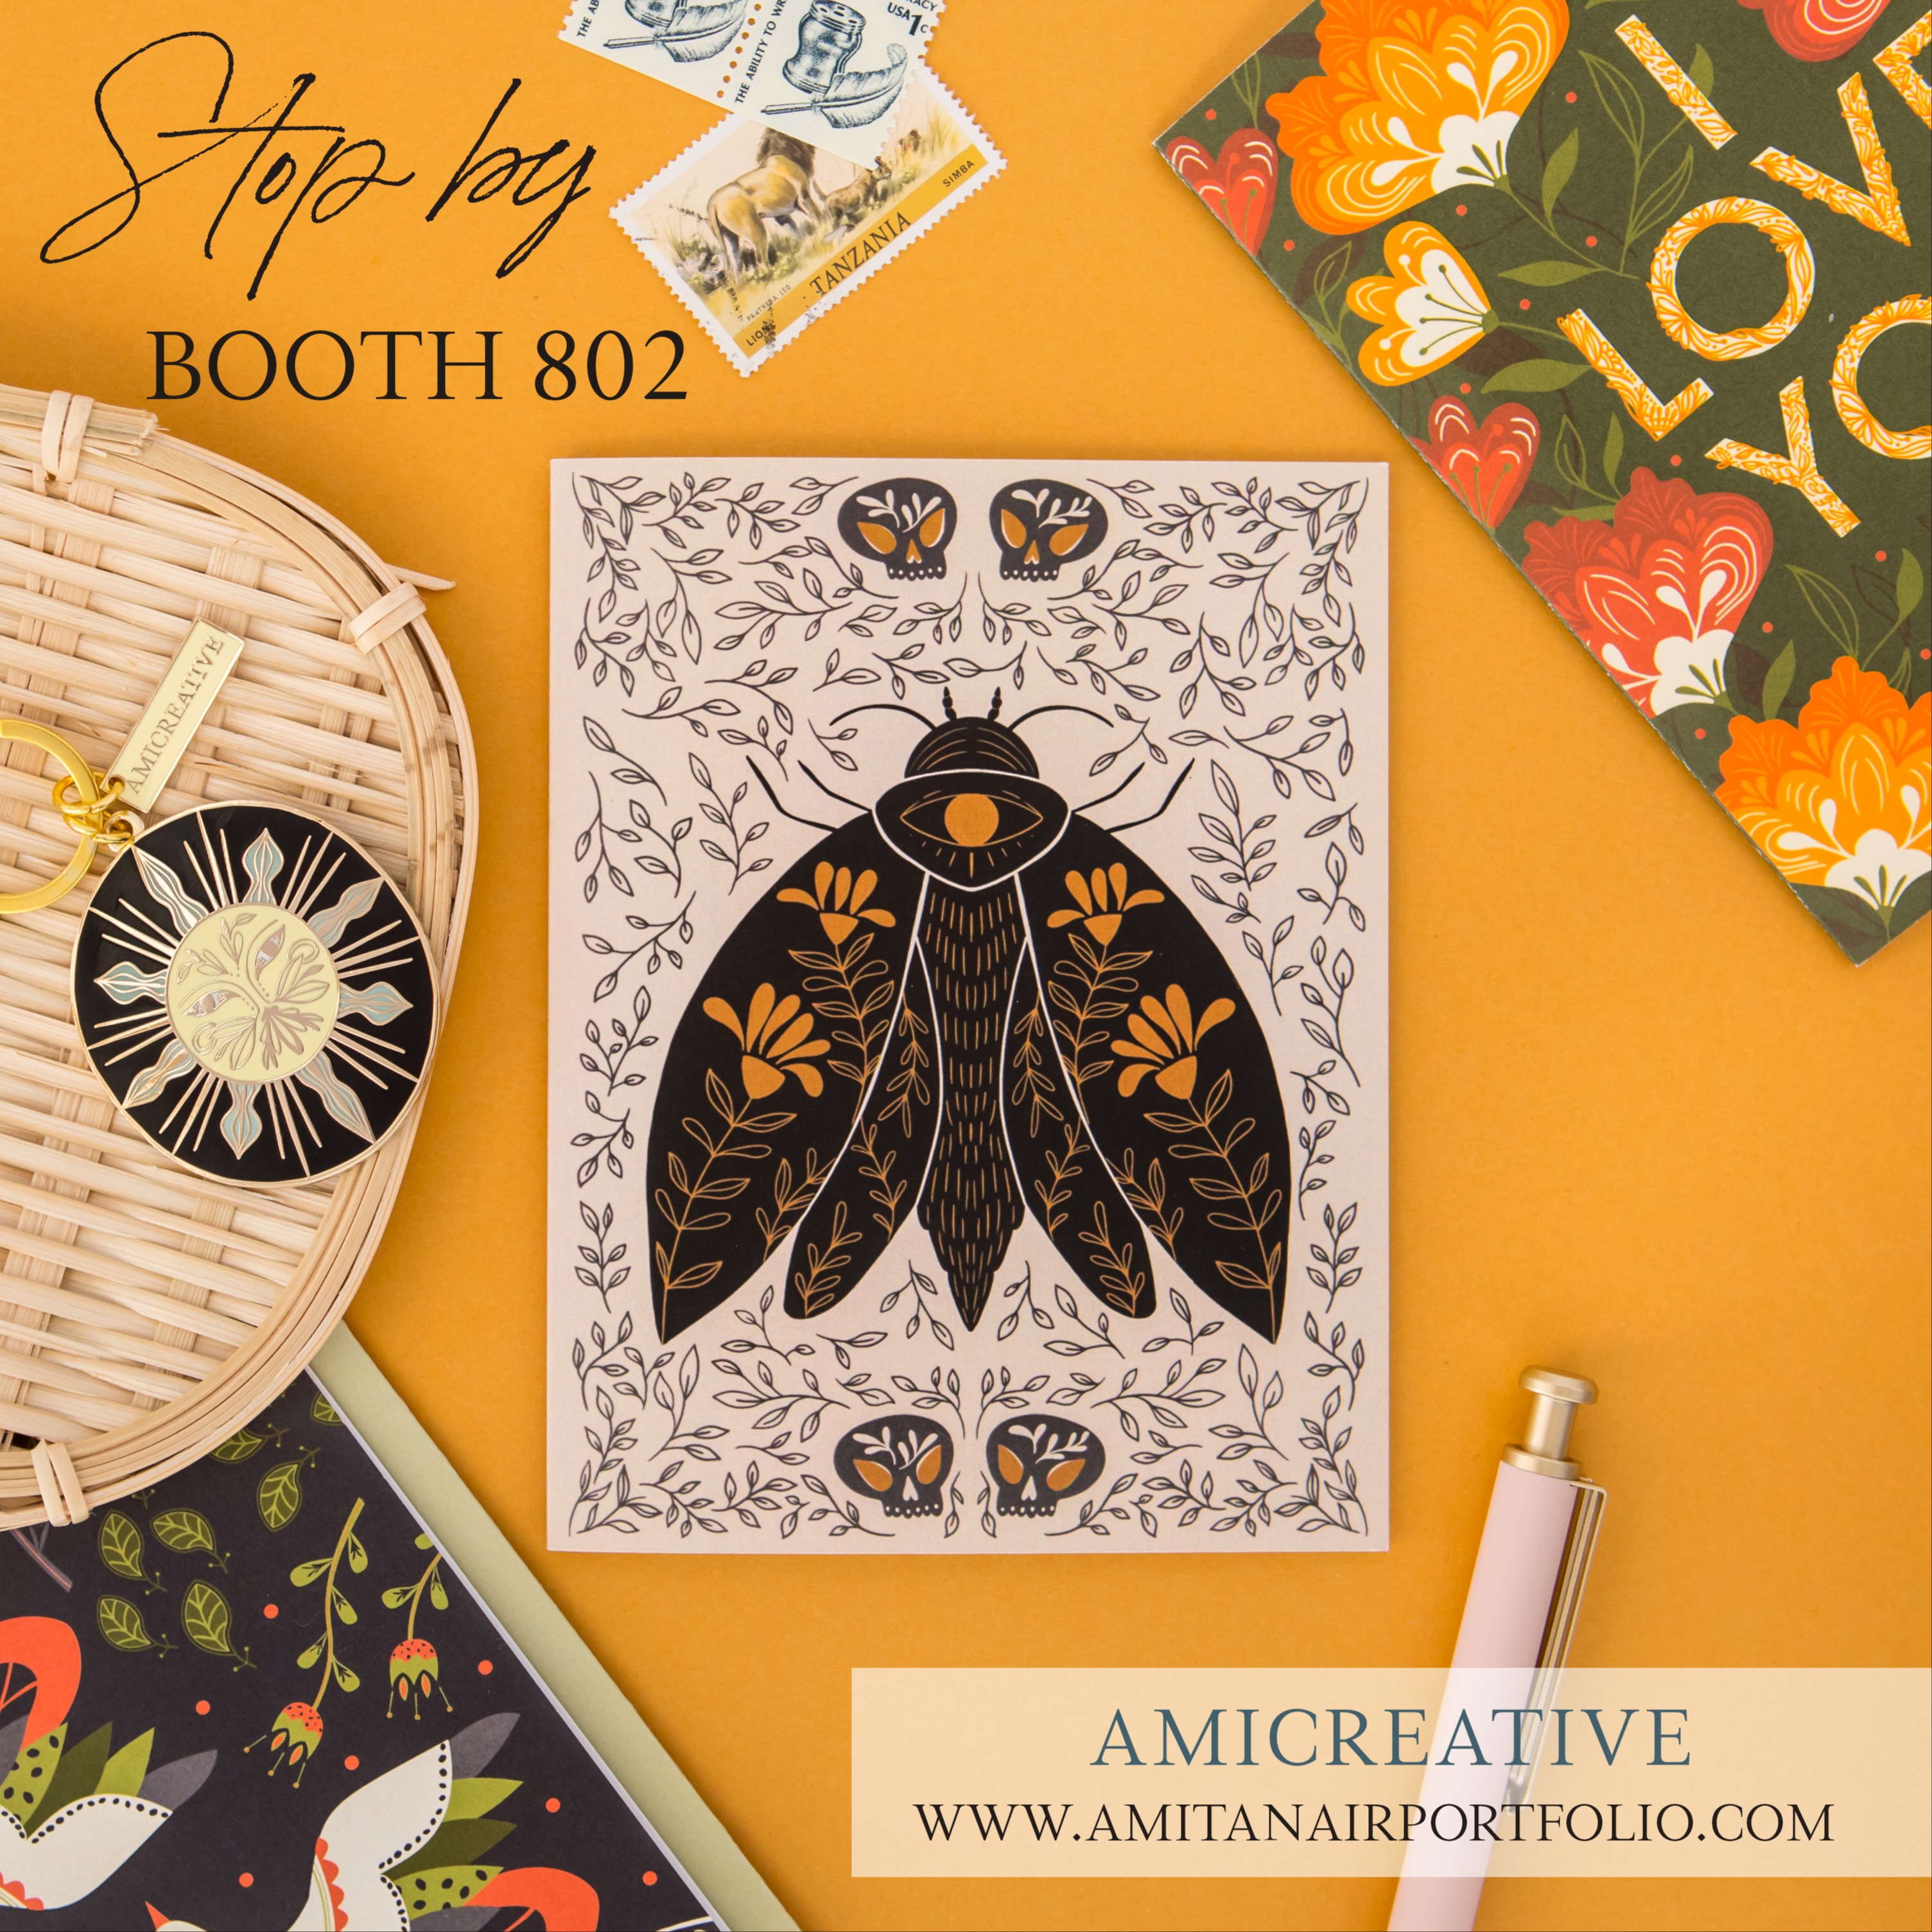 Free Enamel Gifts, Stickers and Greeting Cards  at Booth 802 330